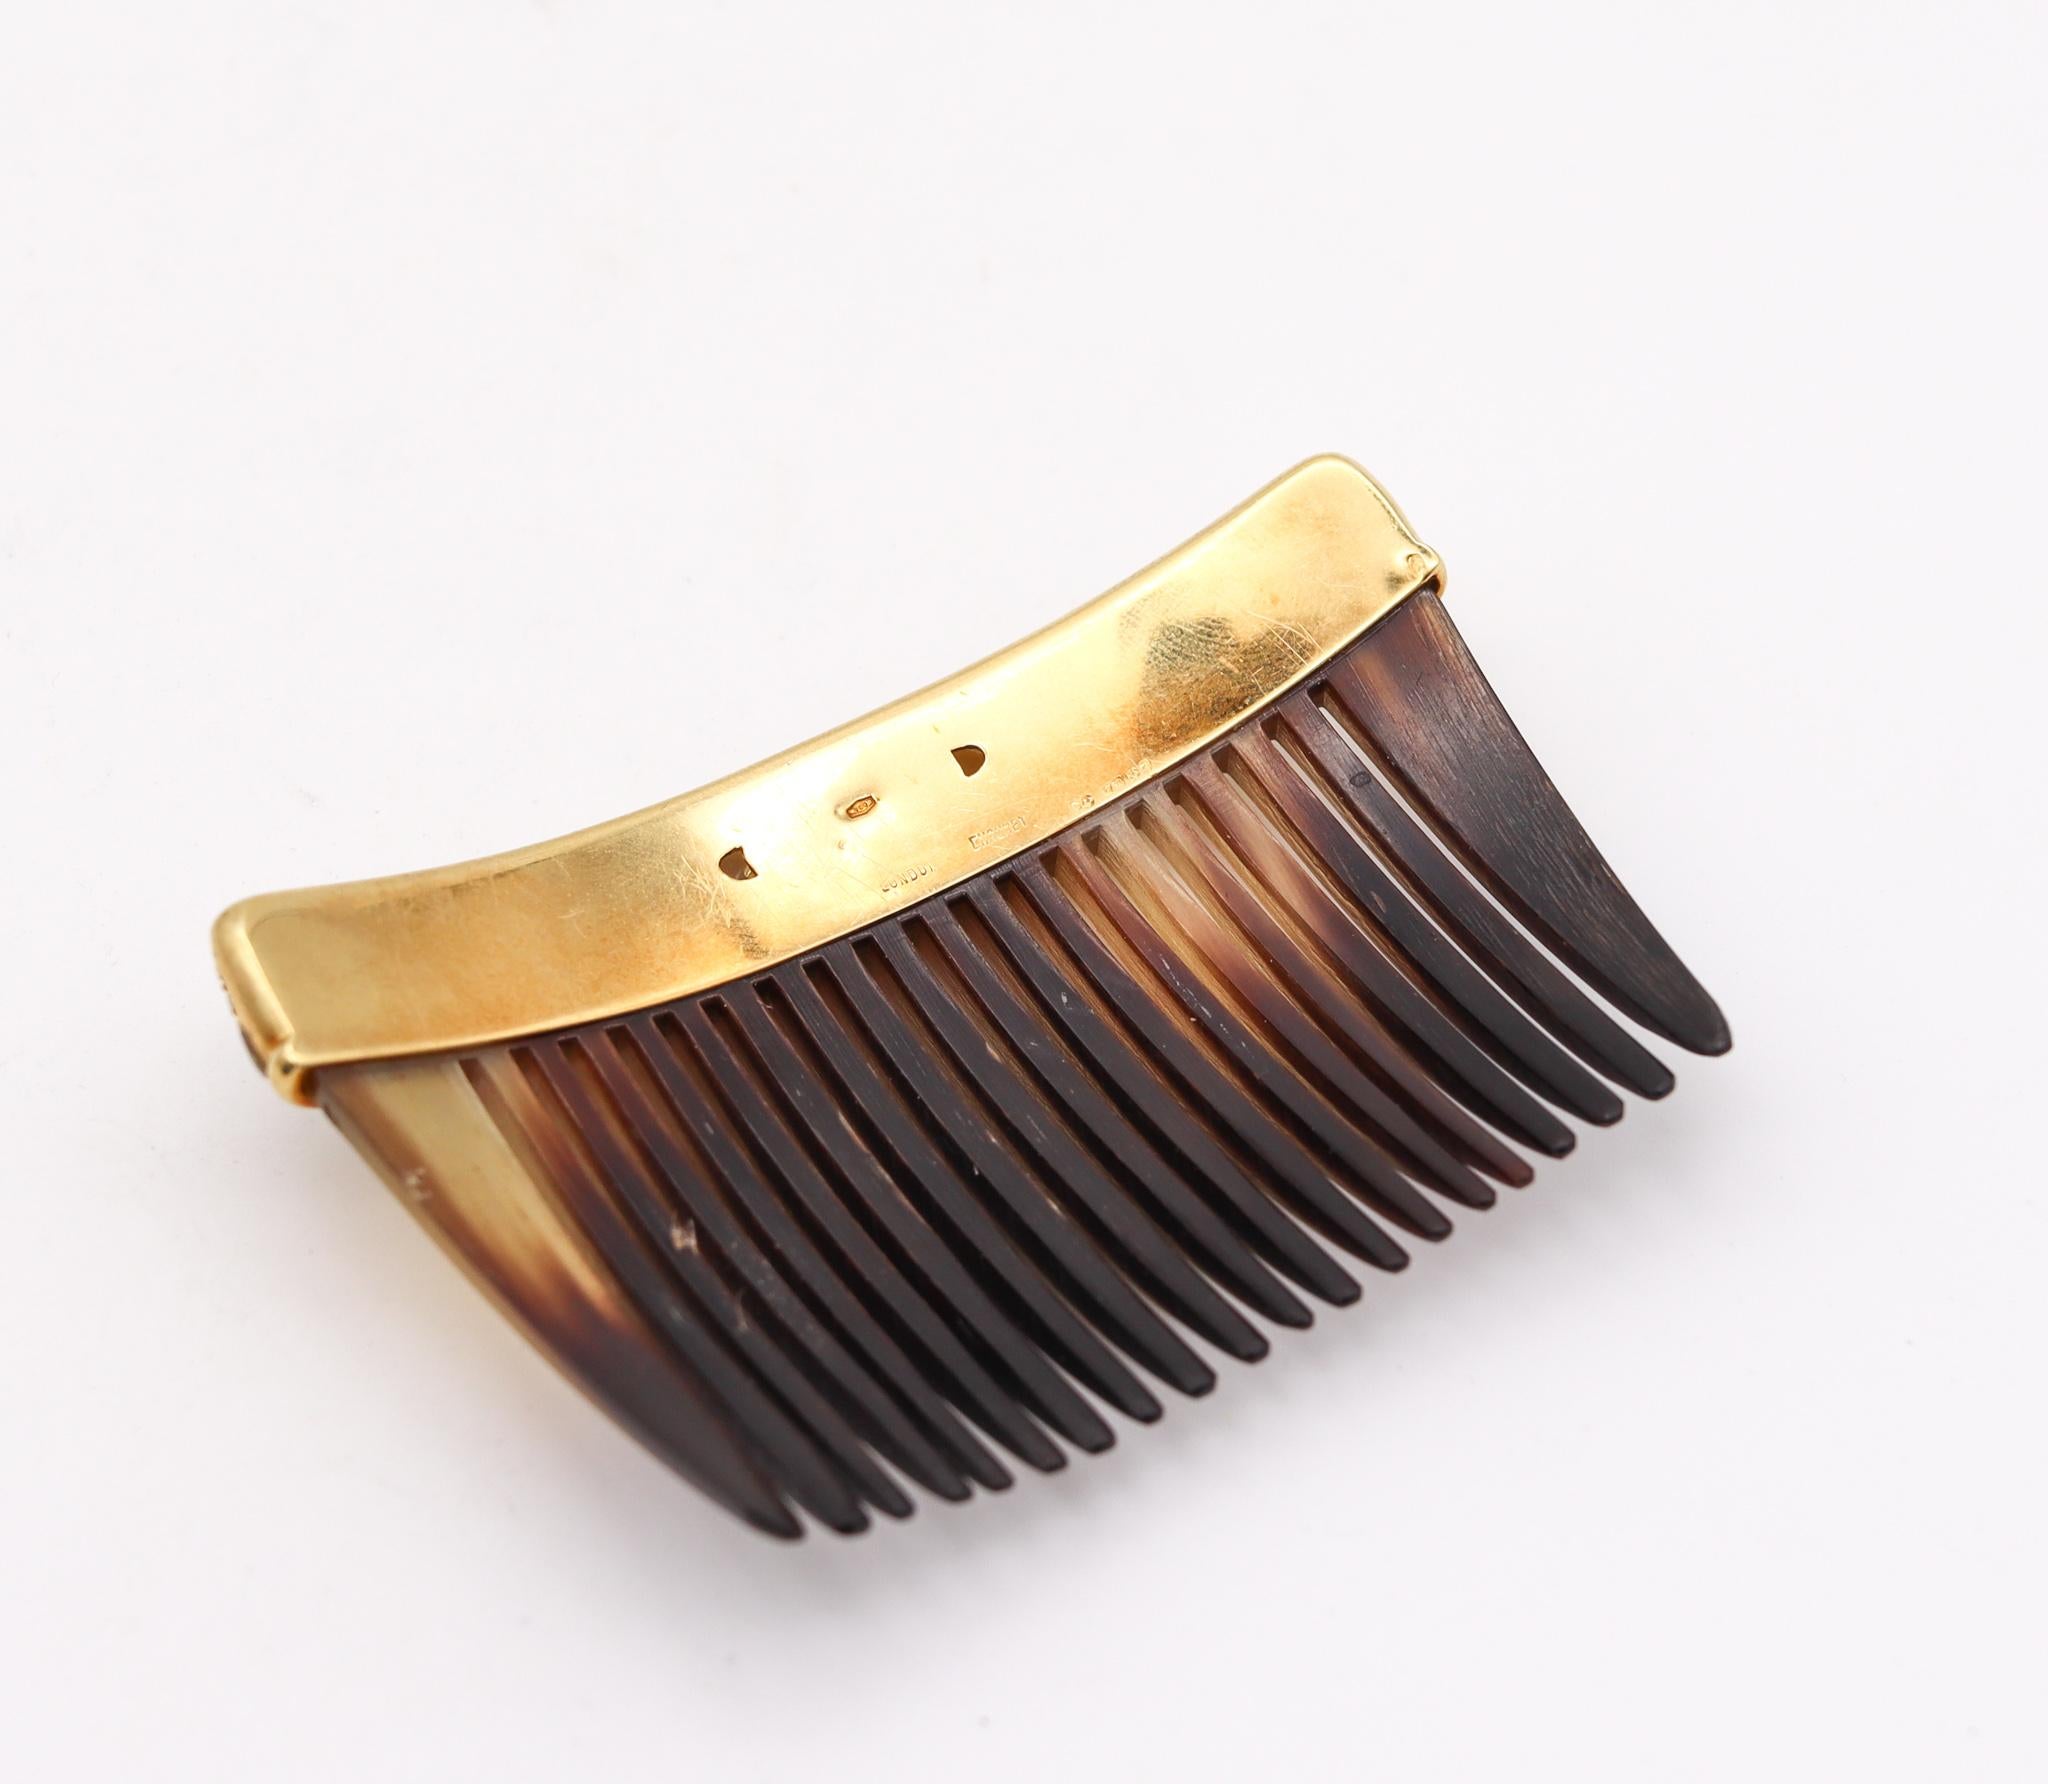 Neoclassical Chaumet London 1968 Hair Comb in 18kt Gold with 2.32ctw in Diamonds and Emerald